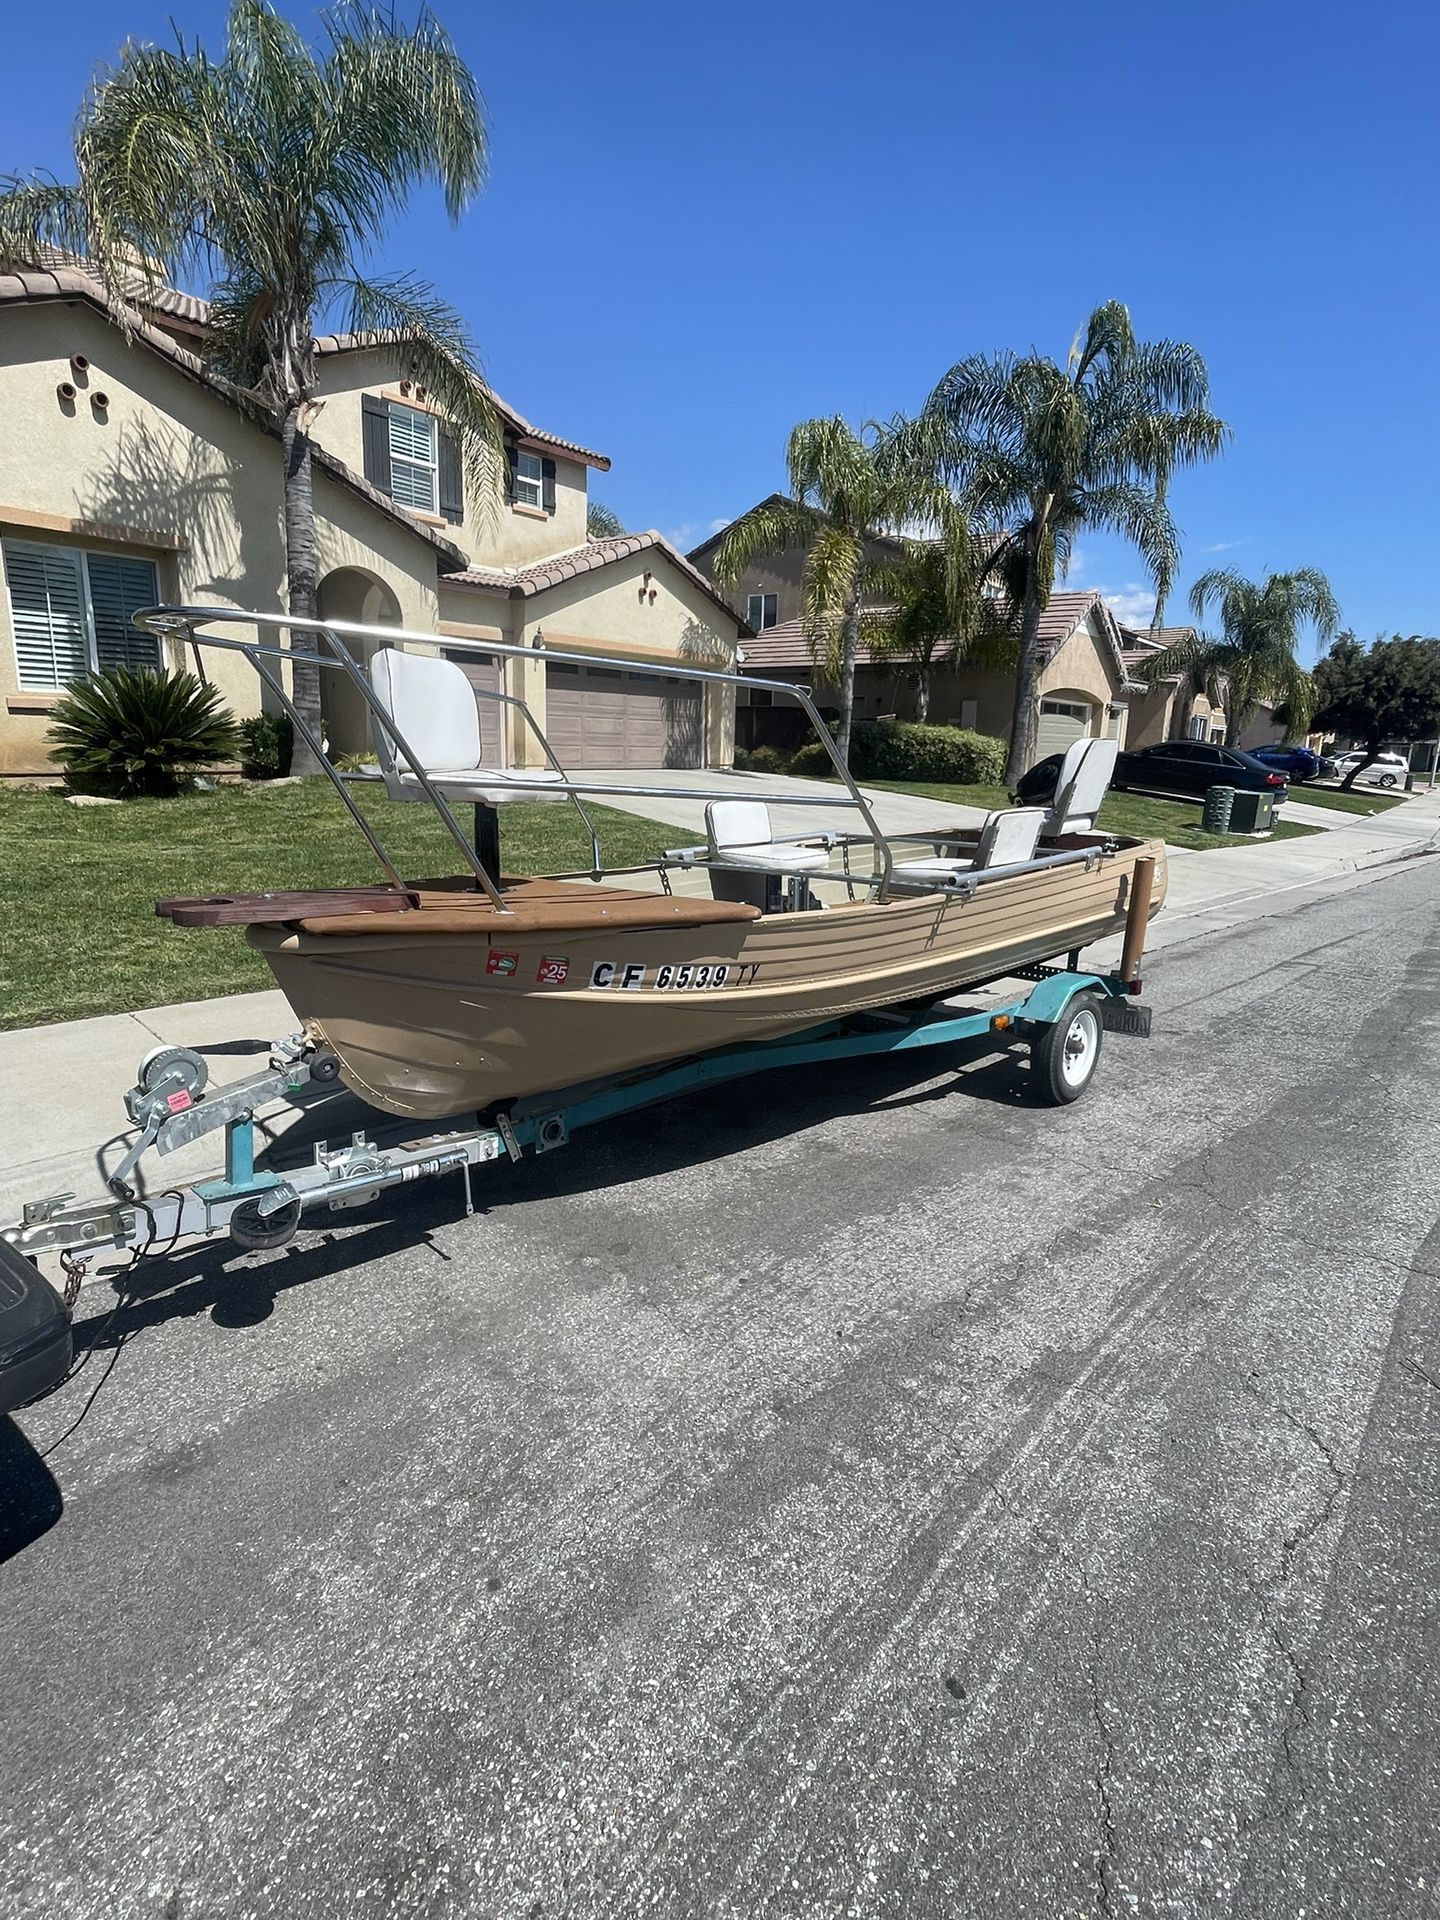 1968 Chrysler 14 Ft Boat With 3.5 Hp Mercury Engine 